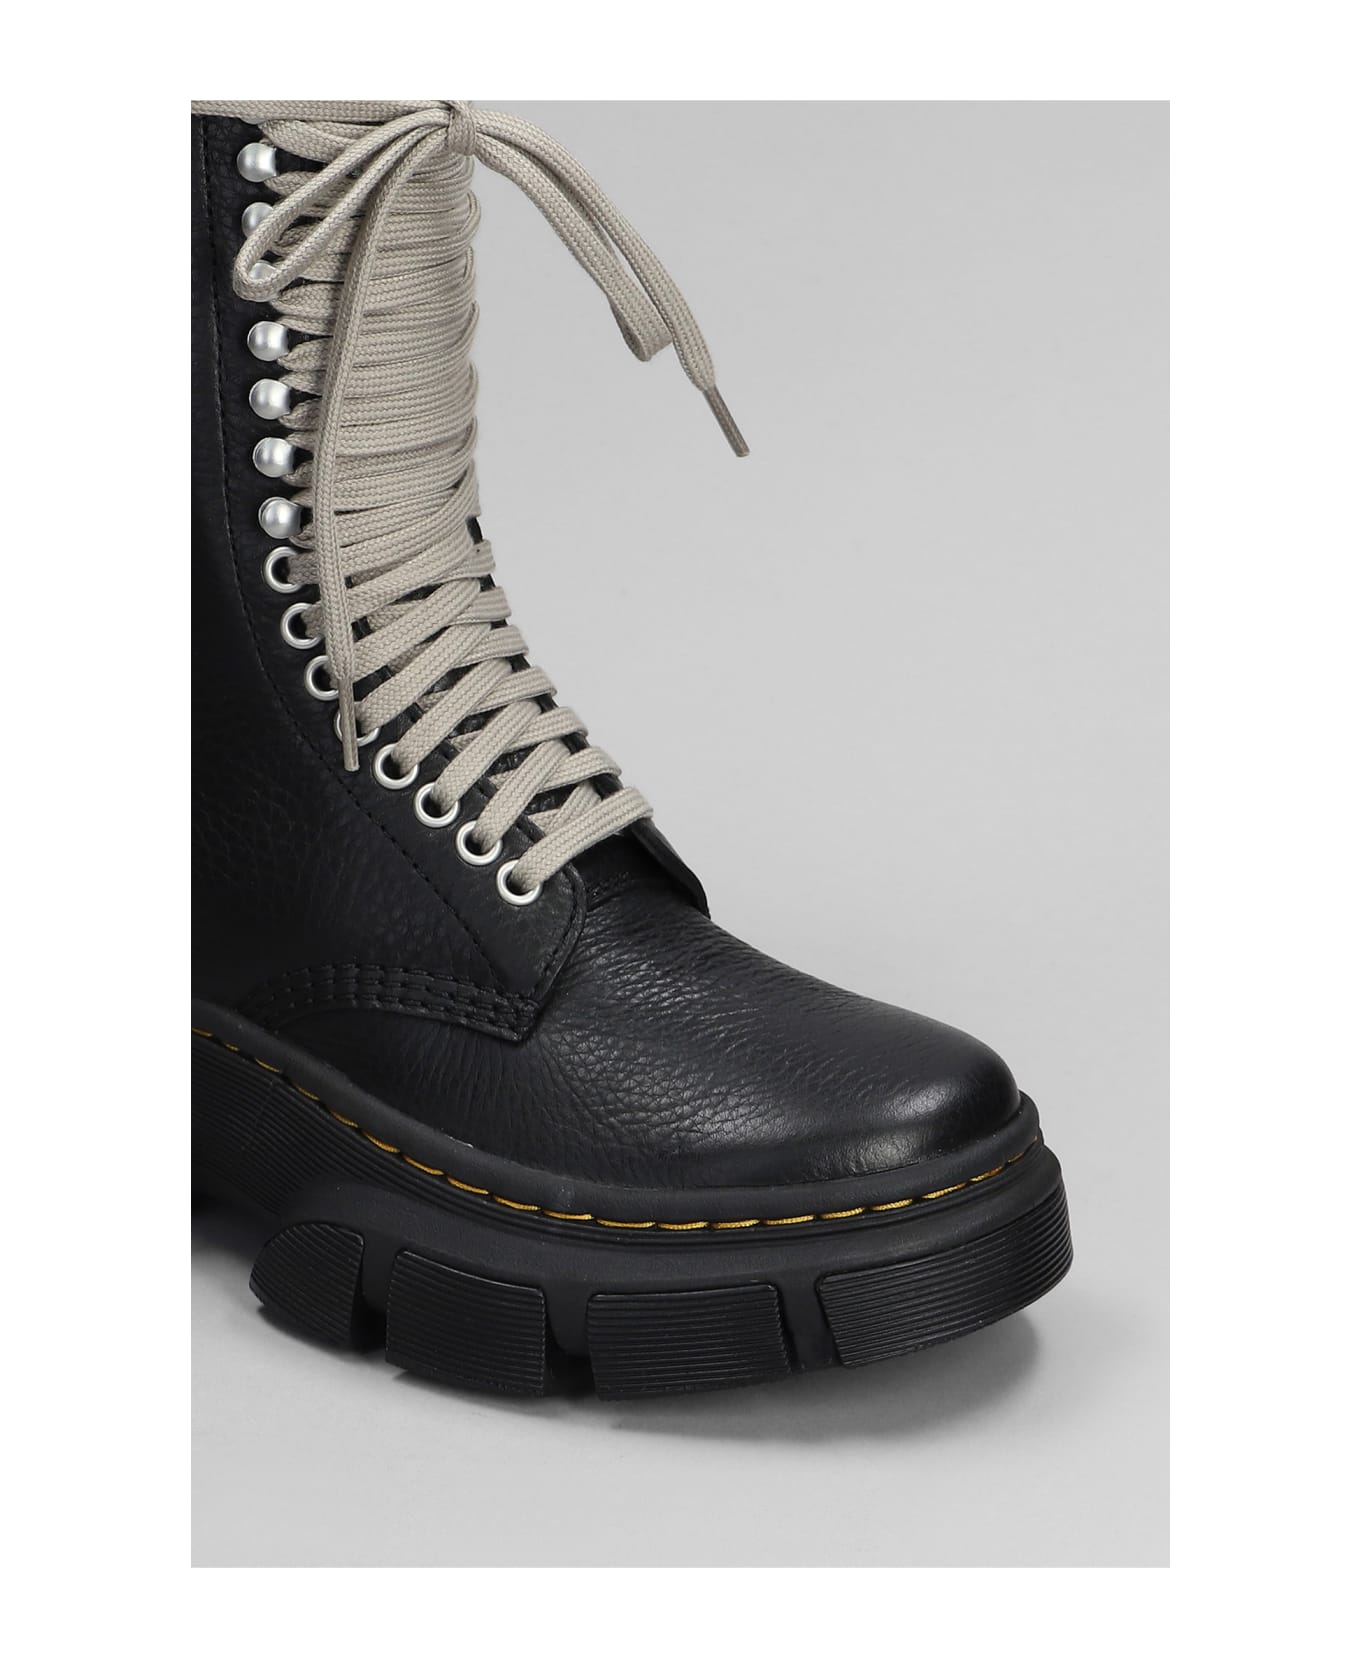 Rick Owens x Dr. Martens Dmxl Length Boot Combat Boots In Black Leather - black ブーツ